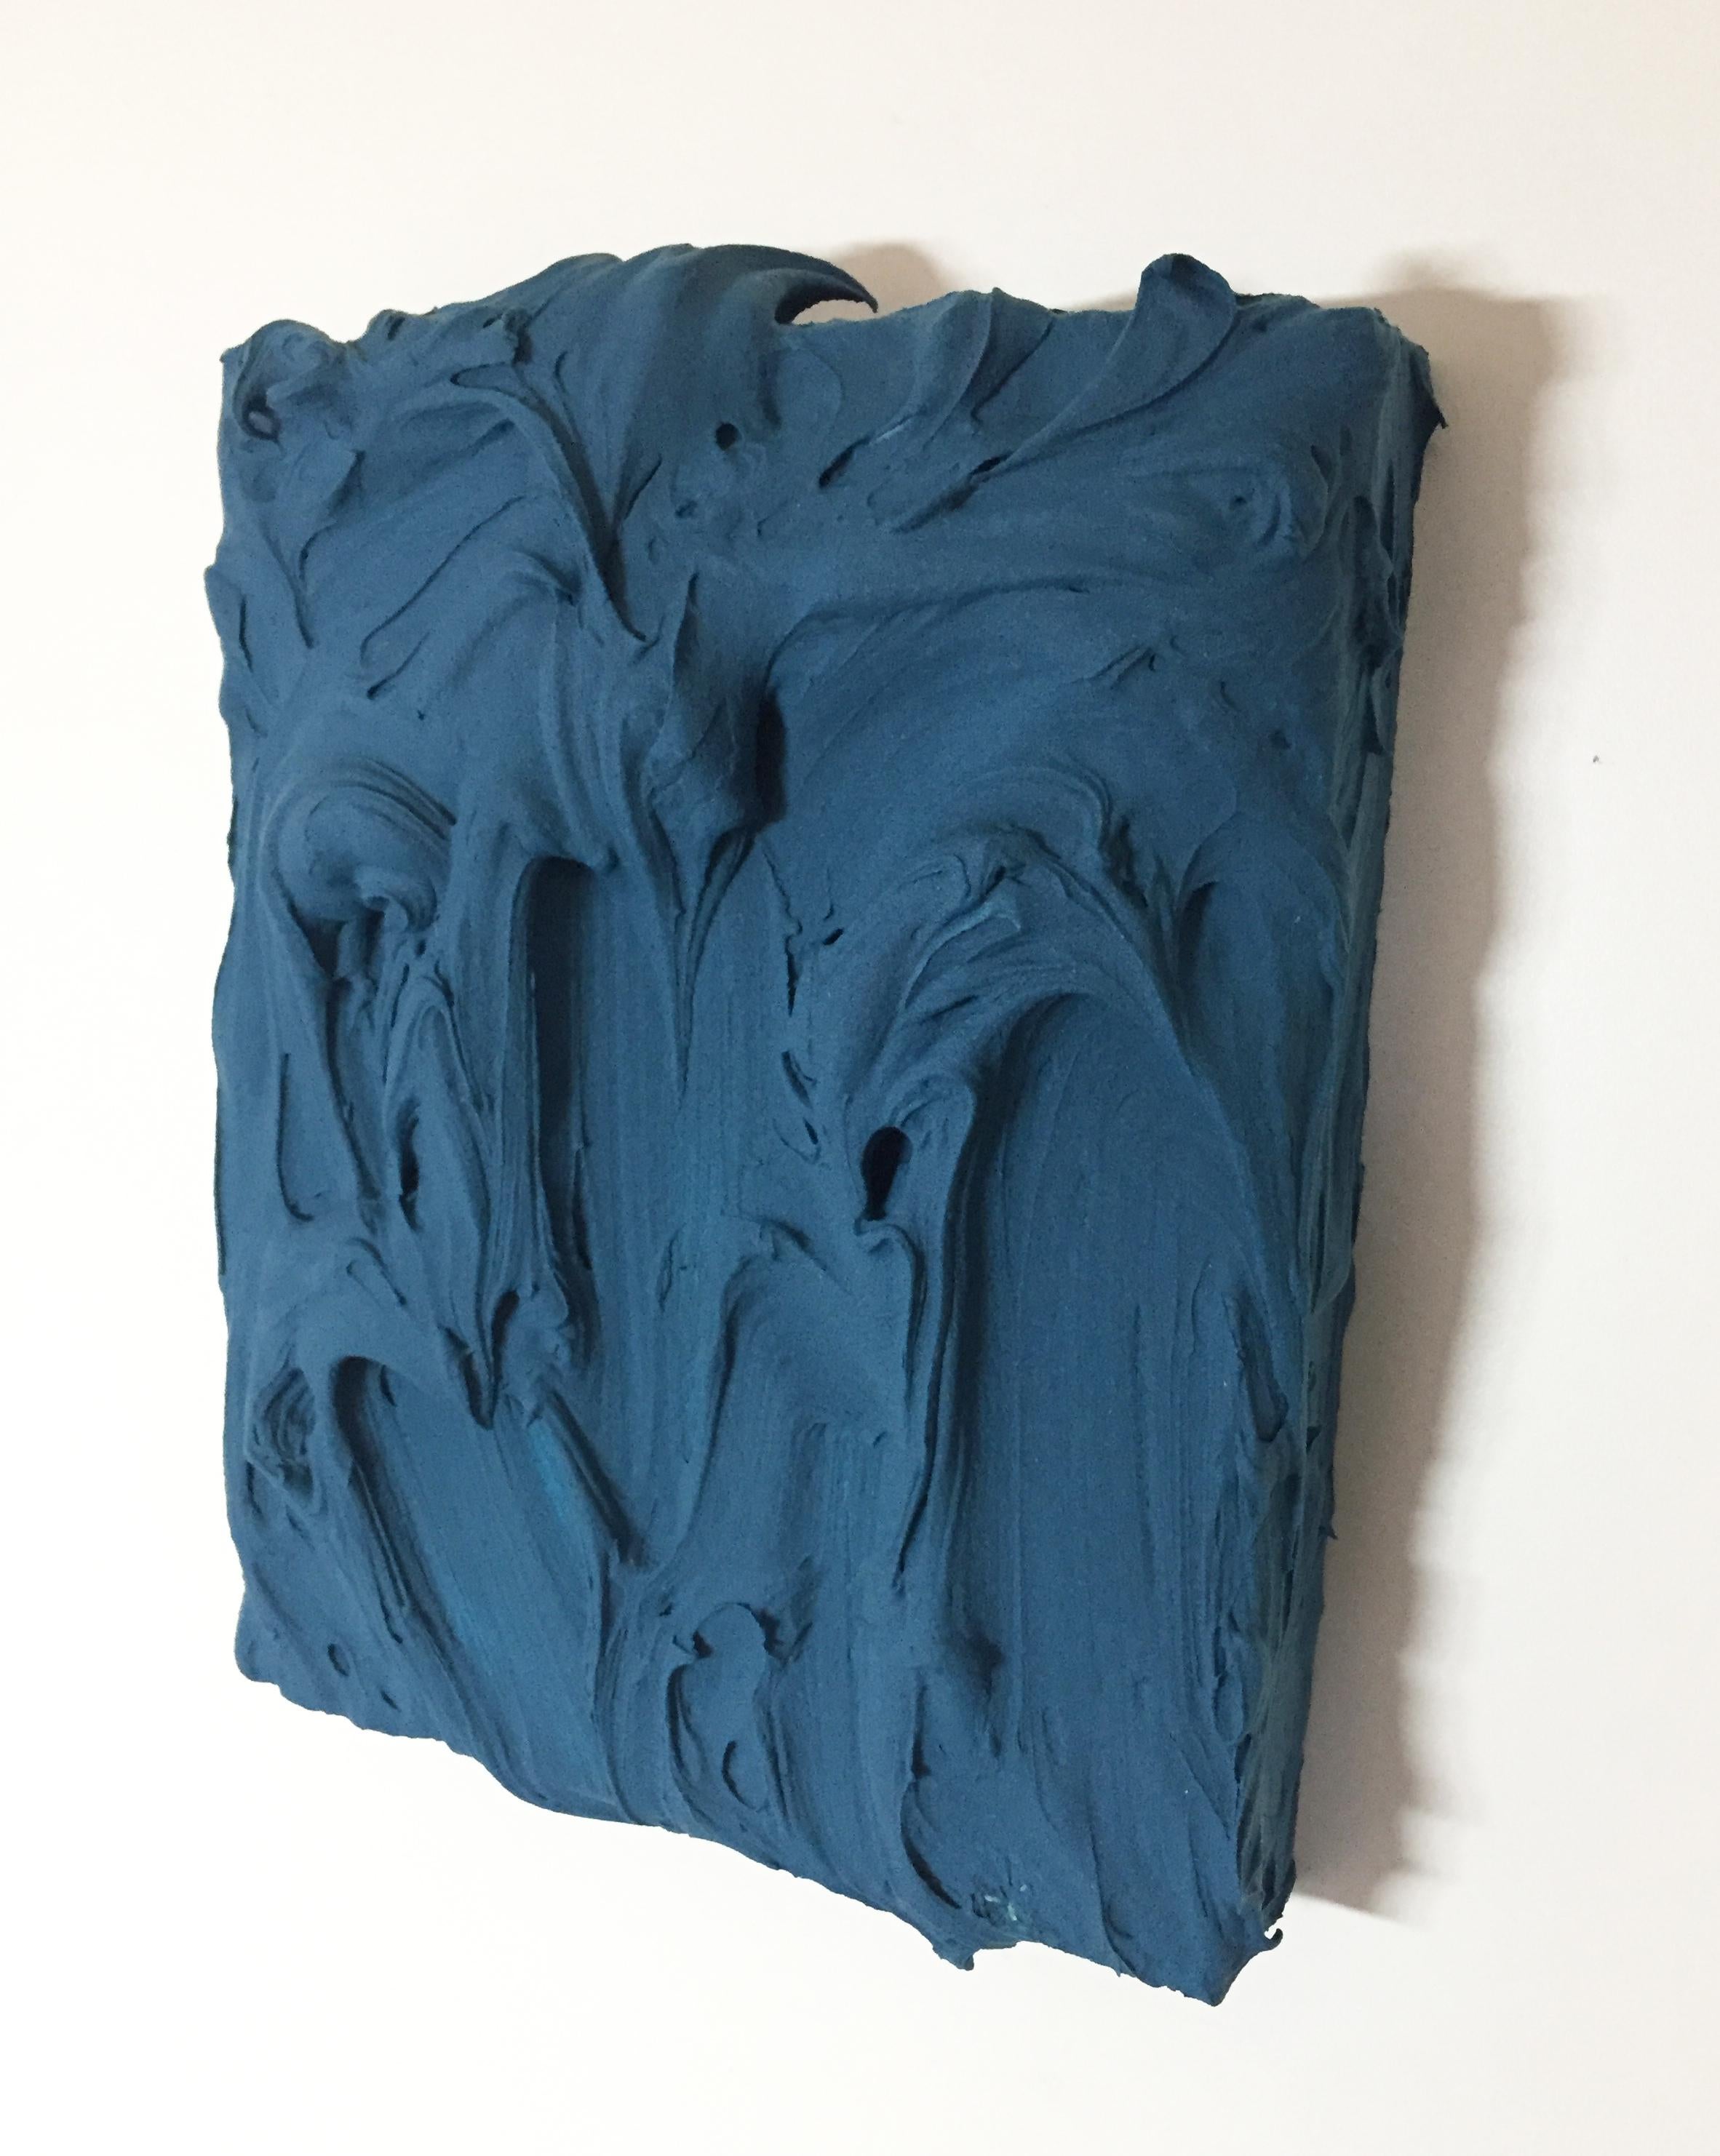 Deep Teal Excess (impasto texture thick painting monochrome pop bold design) - Sculpture by Chloe Hedden